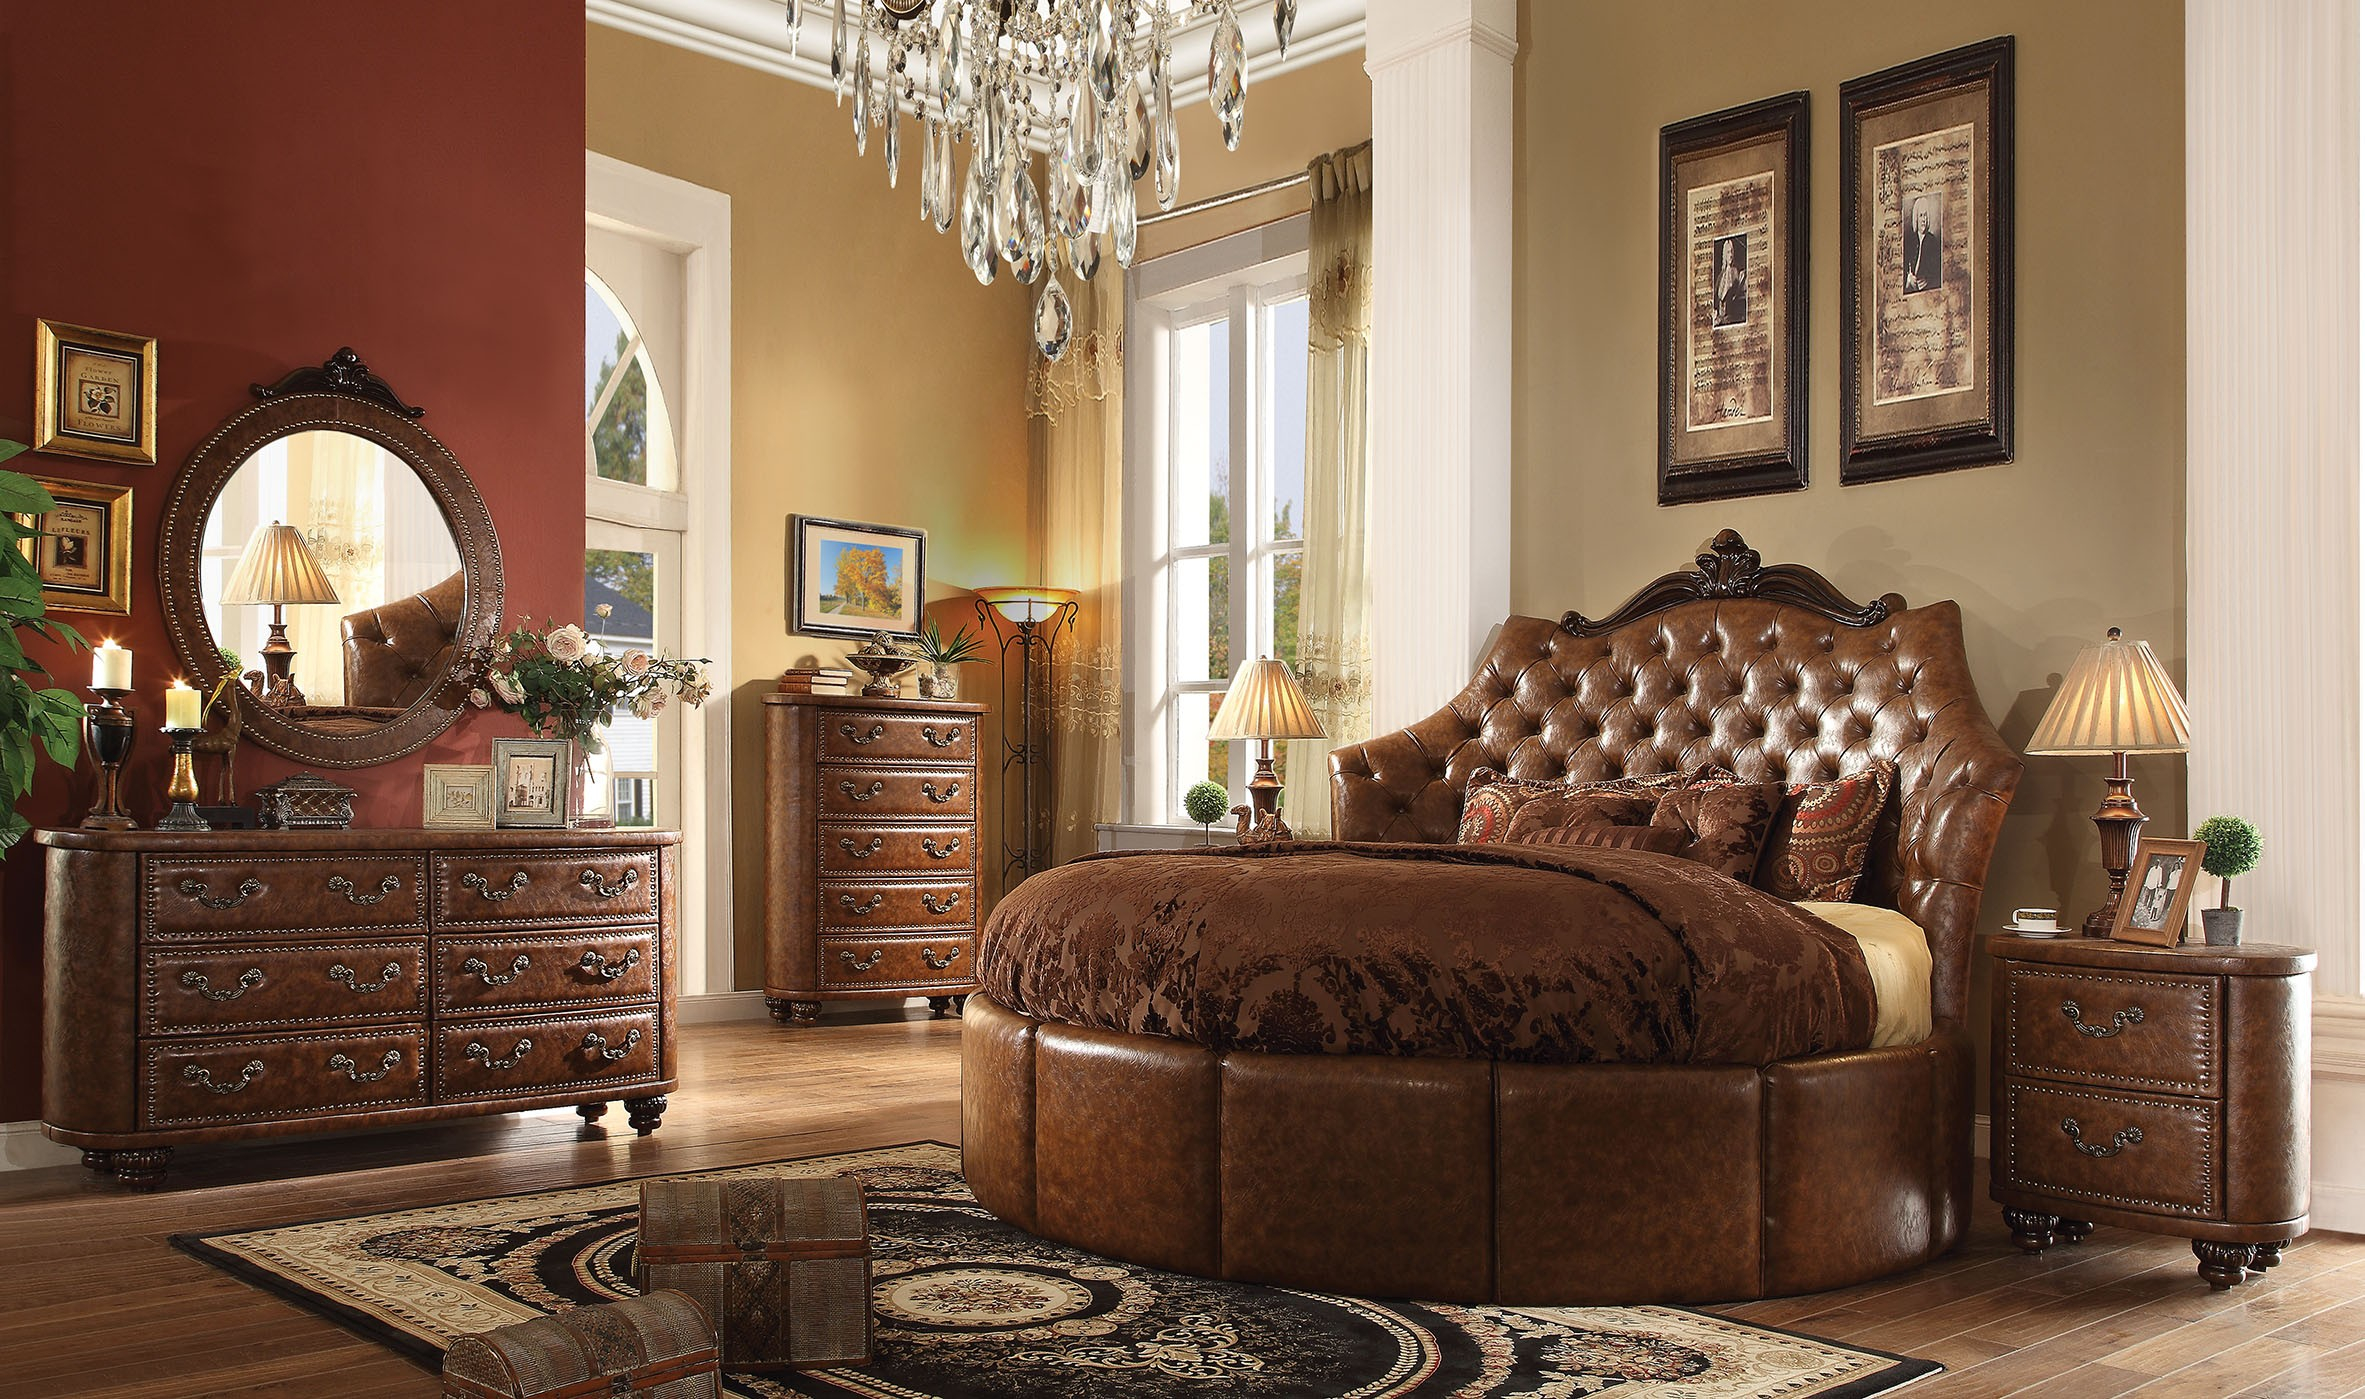 Formal Traditional Cherry Brown Round Bed Bedroom Set 25157rd intended for sizing 2365 X 1399